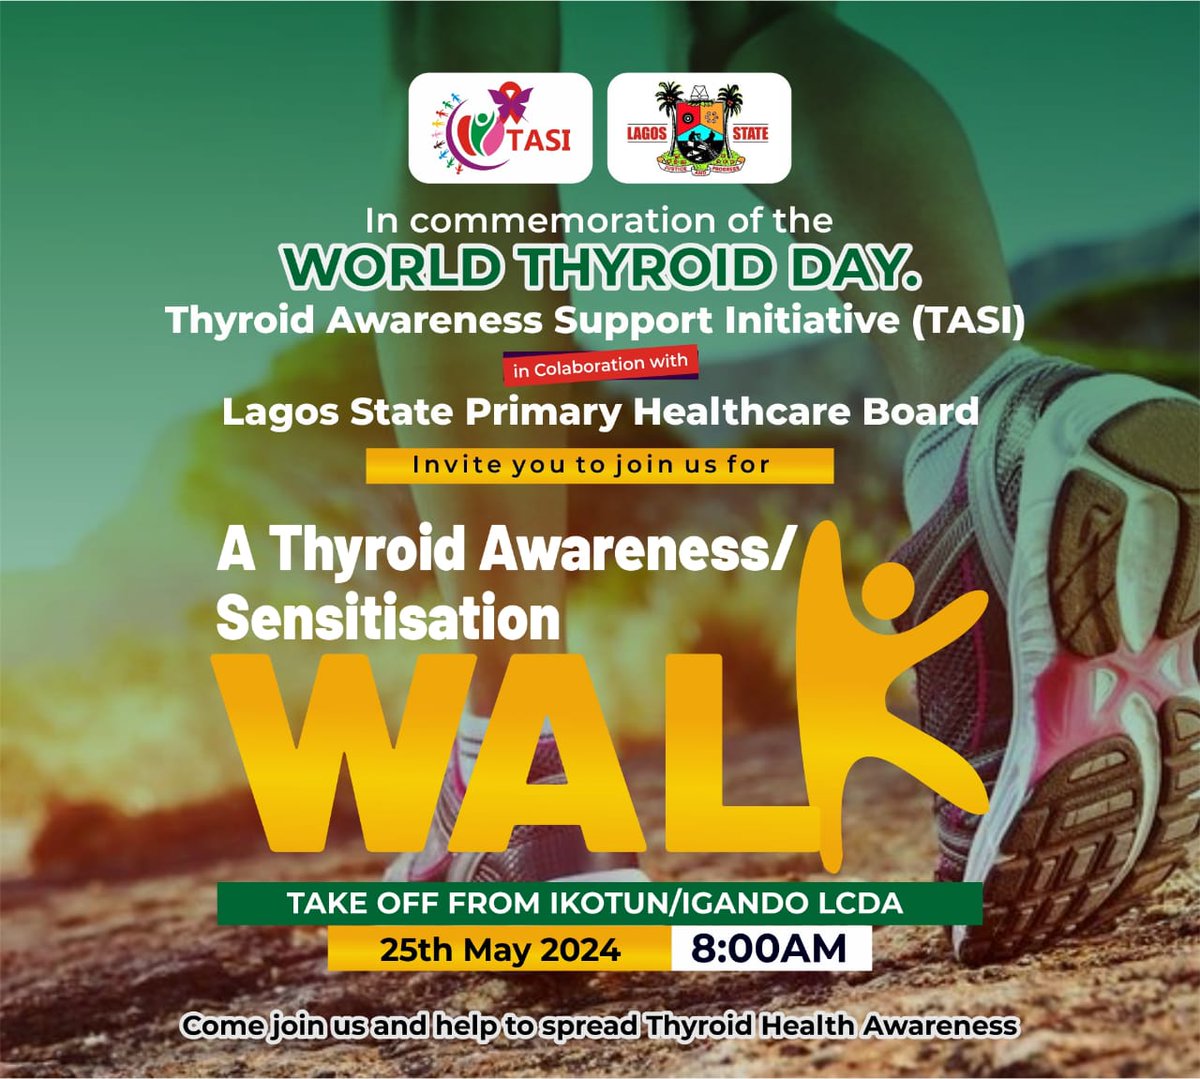 In commemoration of the International Thyroid Awareness week and World Thyroid Day, TASI invites you to partner and walk for thyroid awareness to promote thyroid health and support people suffering from thyroid diseases. Please donate to support Details on flier.